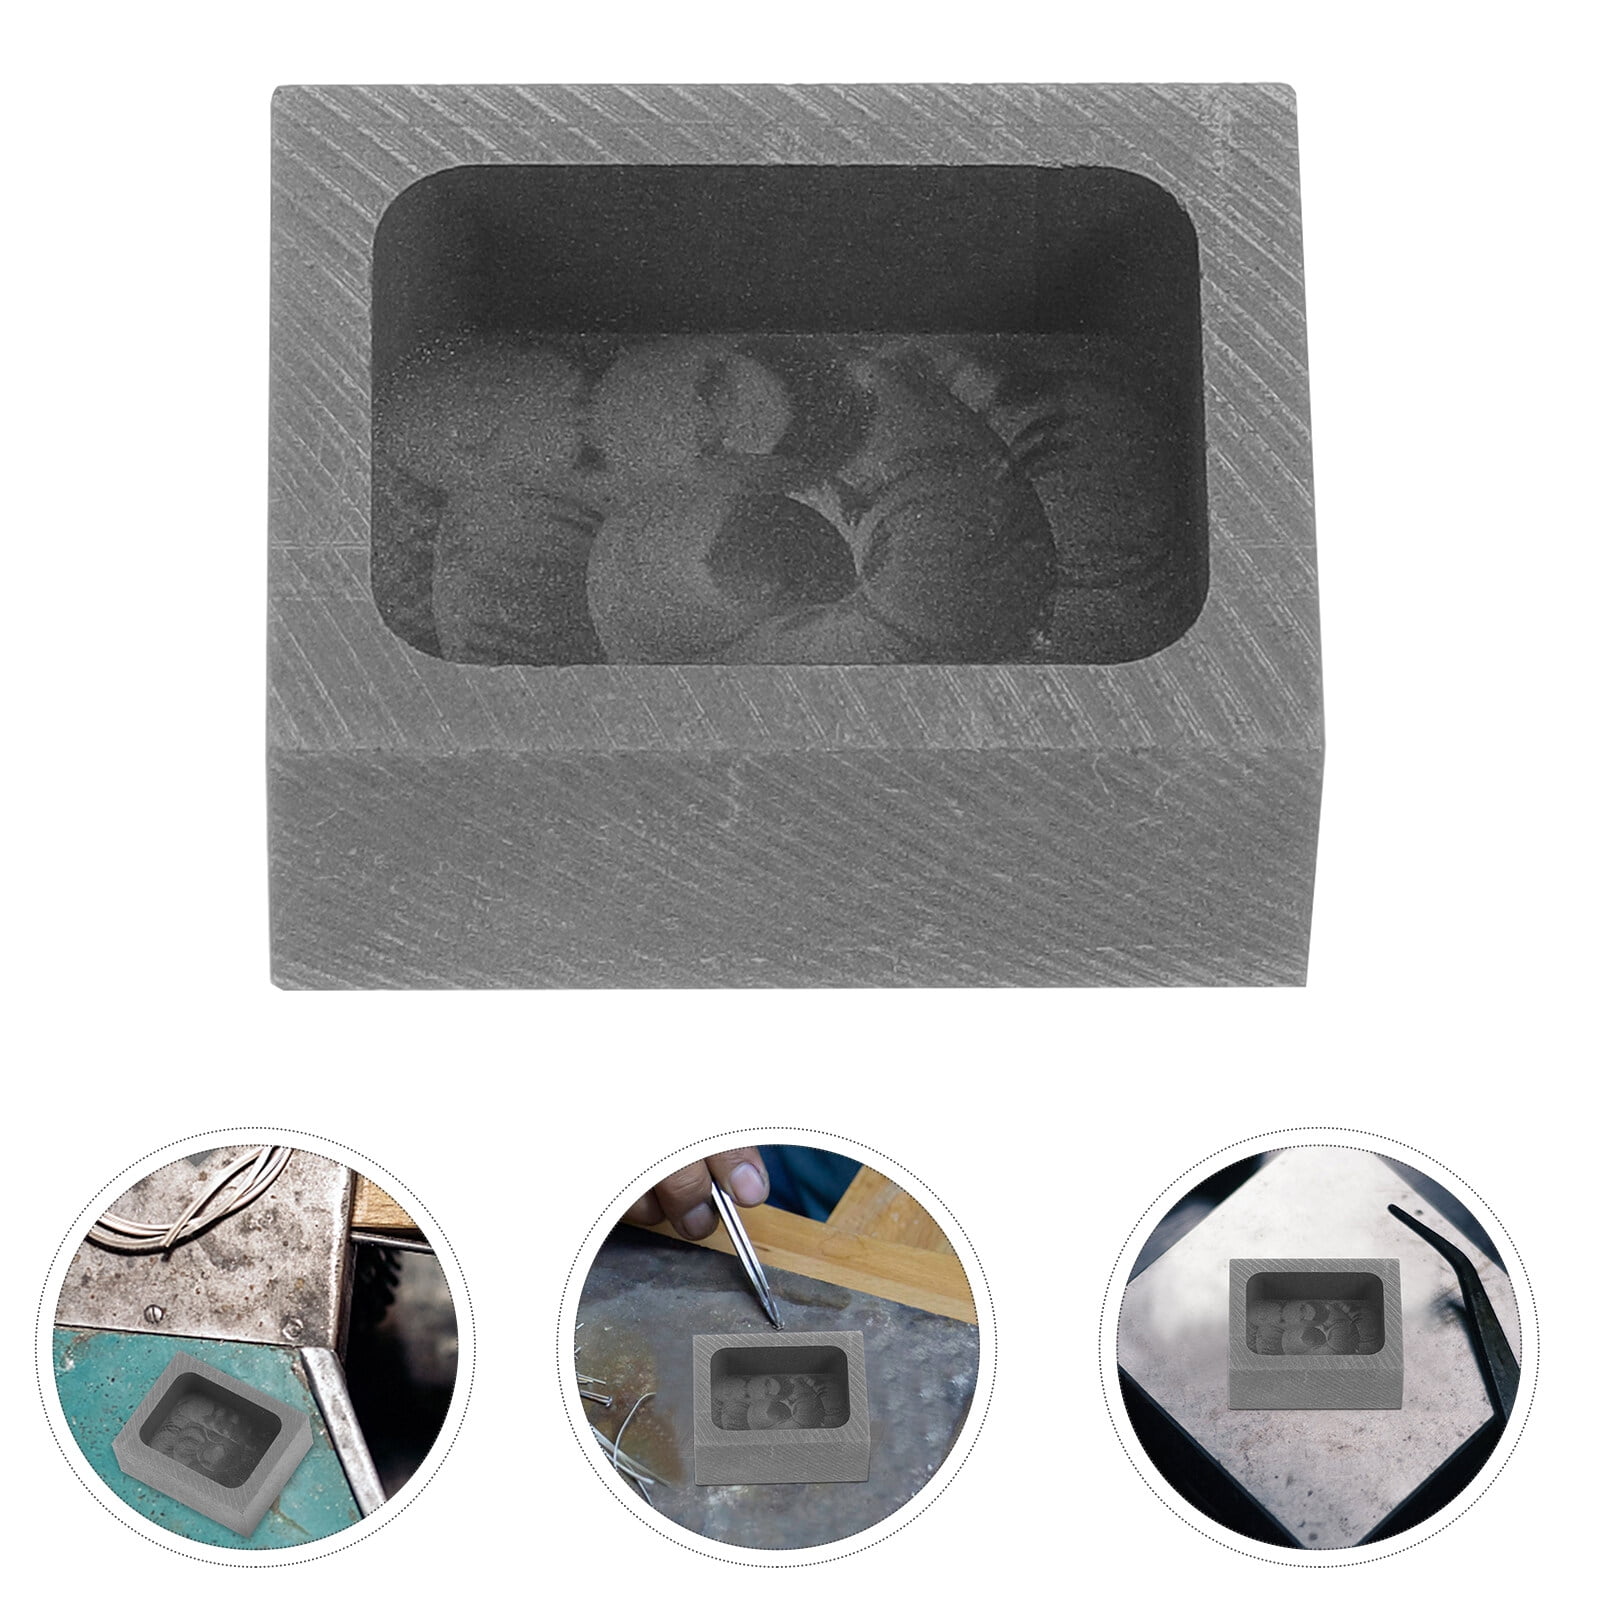 Shop For Wholesale custom graphite ingot molds At Favorable Prices 